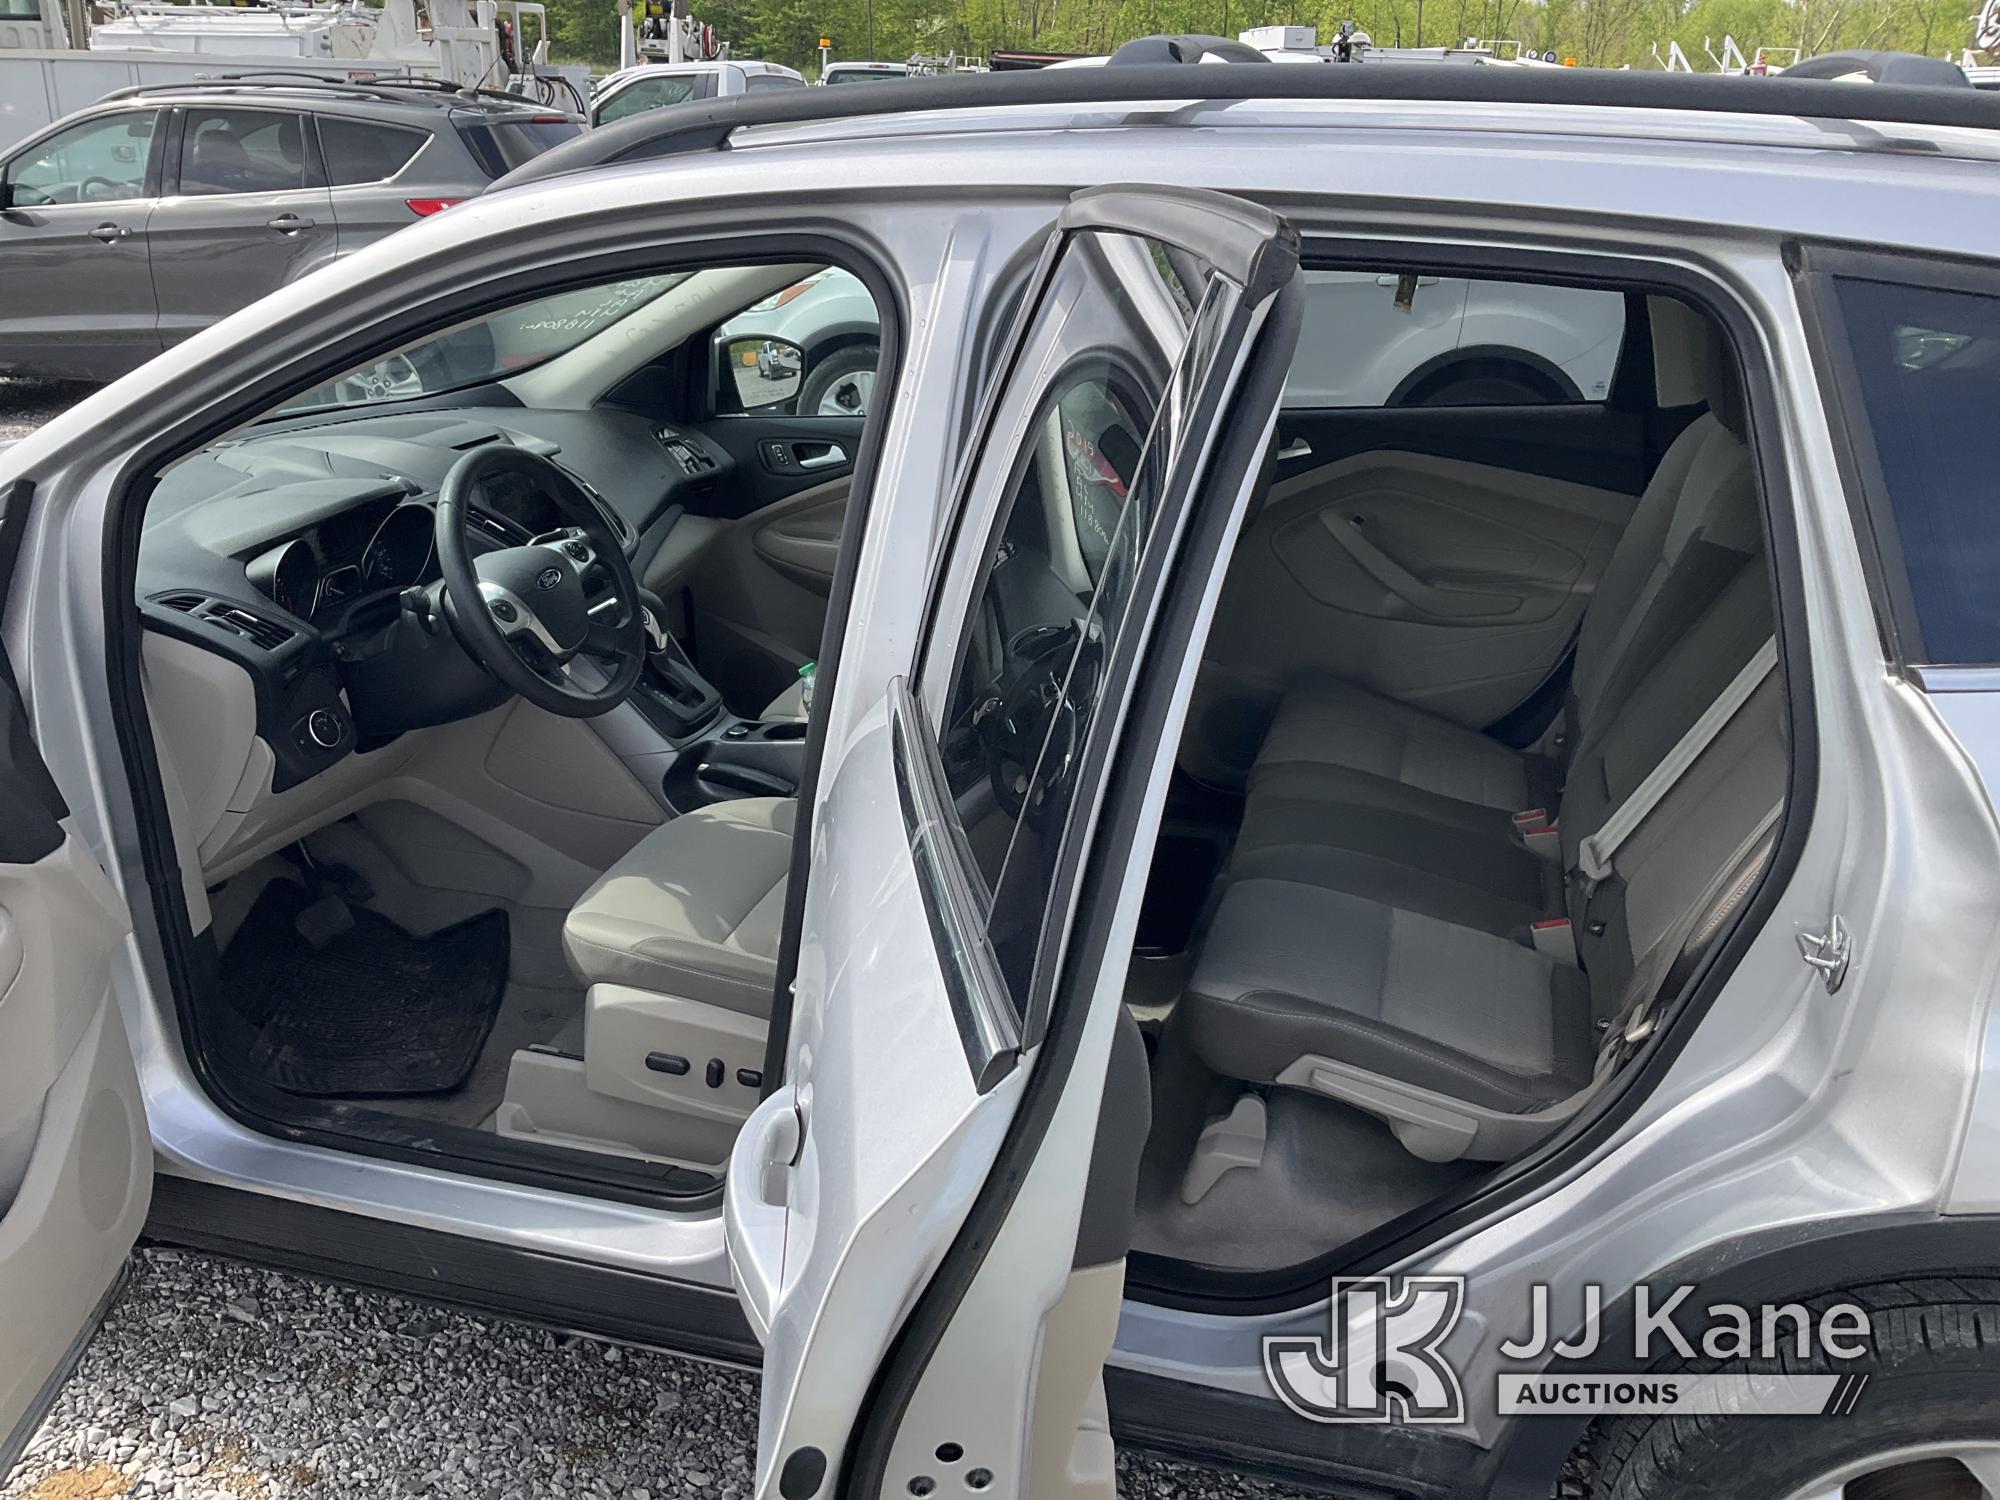 (Verona, KY) 2015 Ford Escape 4x4 4-Door Sport Utility Vehicle Runs & Moves) (Check Engine Light On)